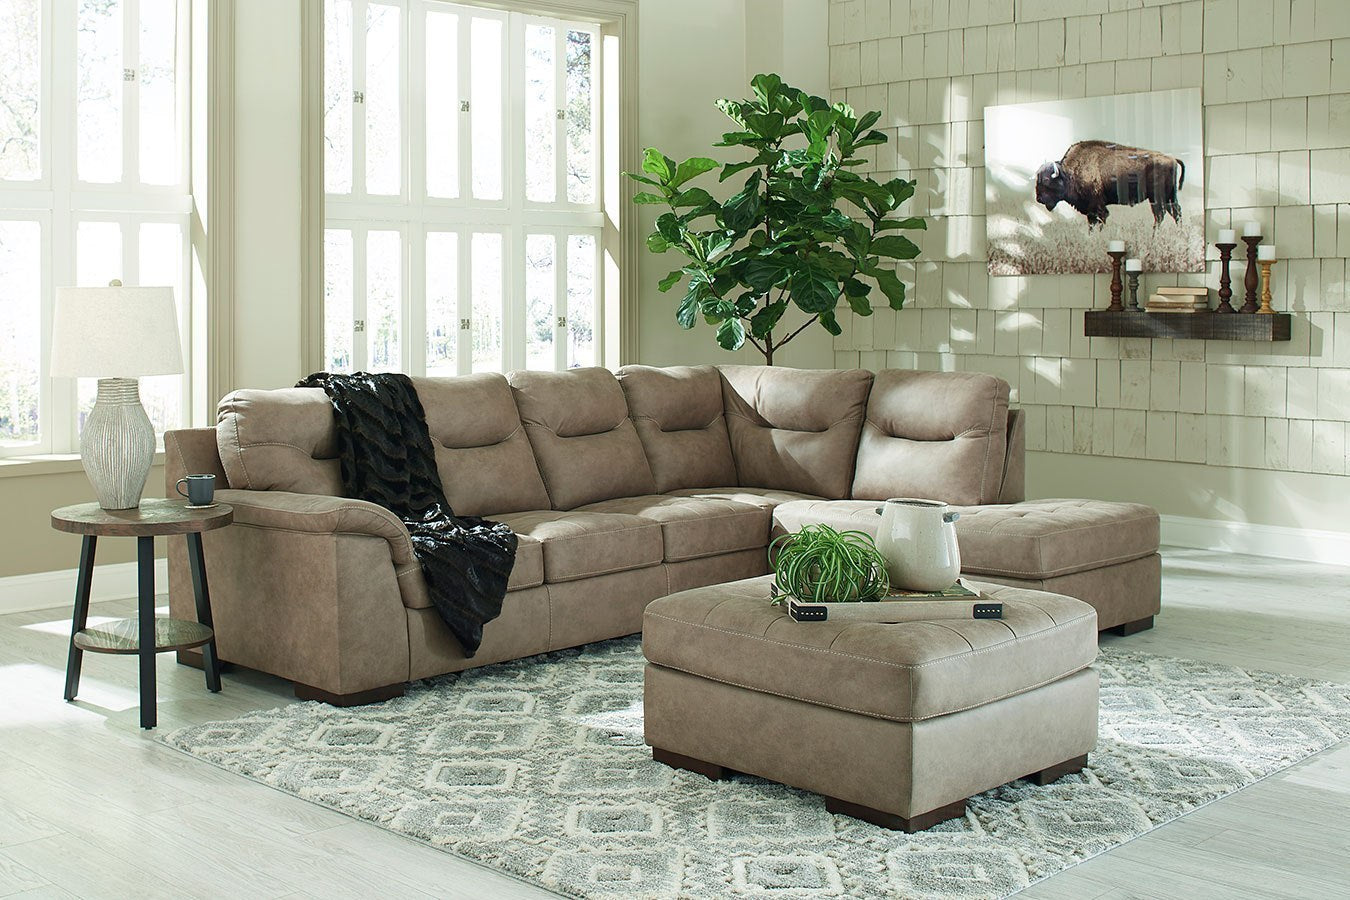 WEEKLY or MONTHLY. Puffy Walnut Sofa and Loveseat